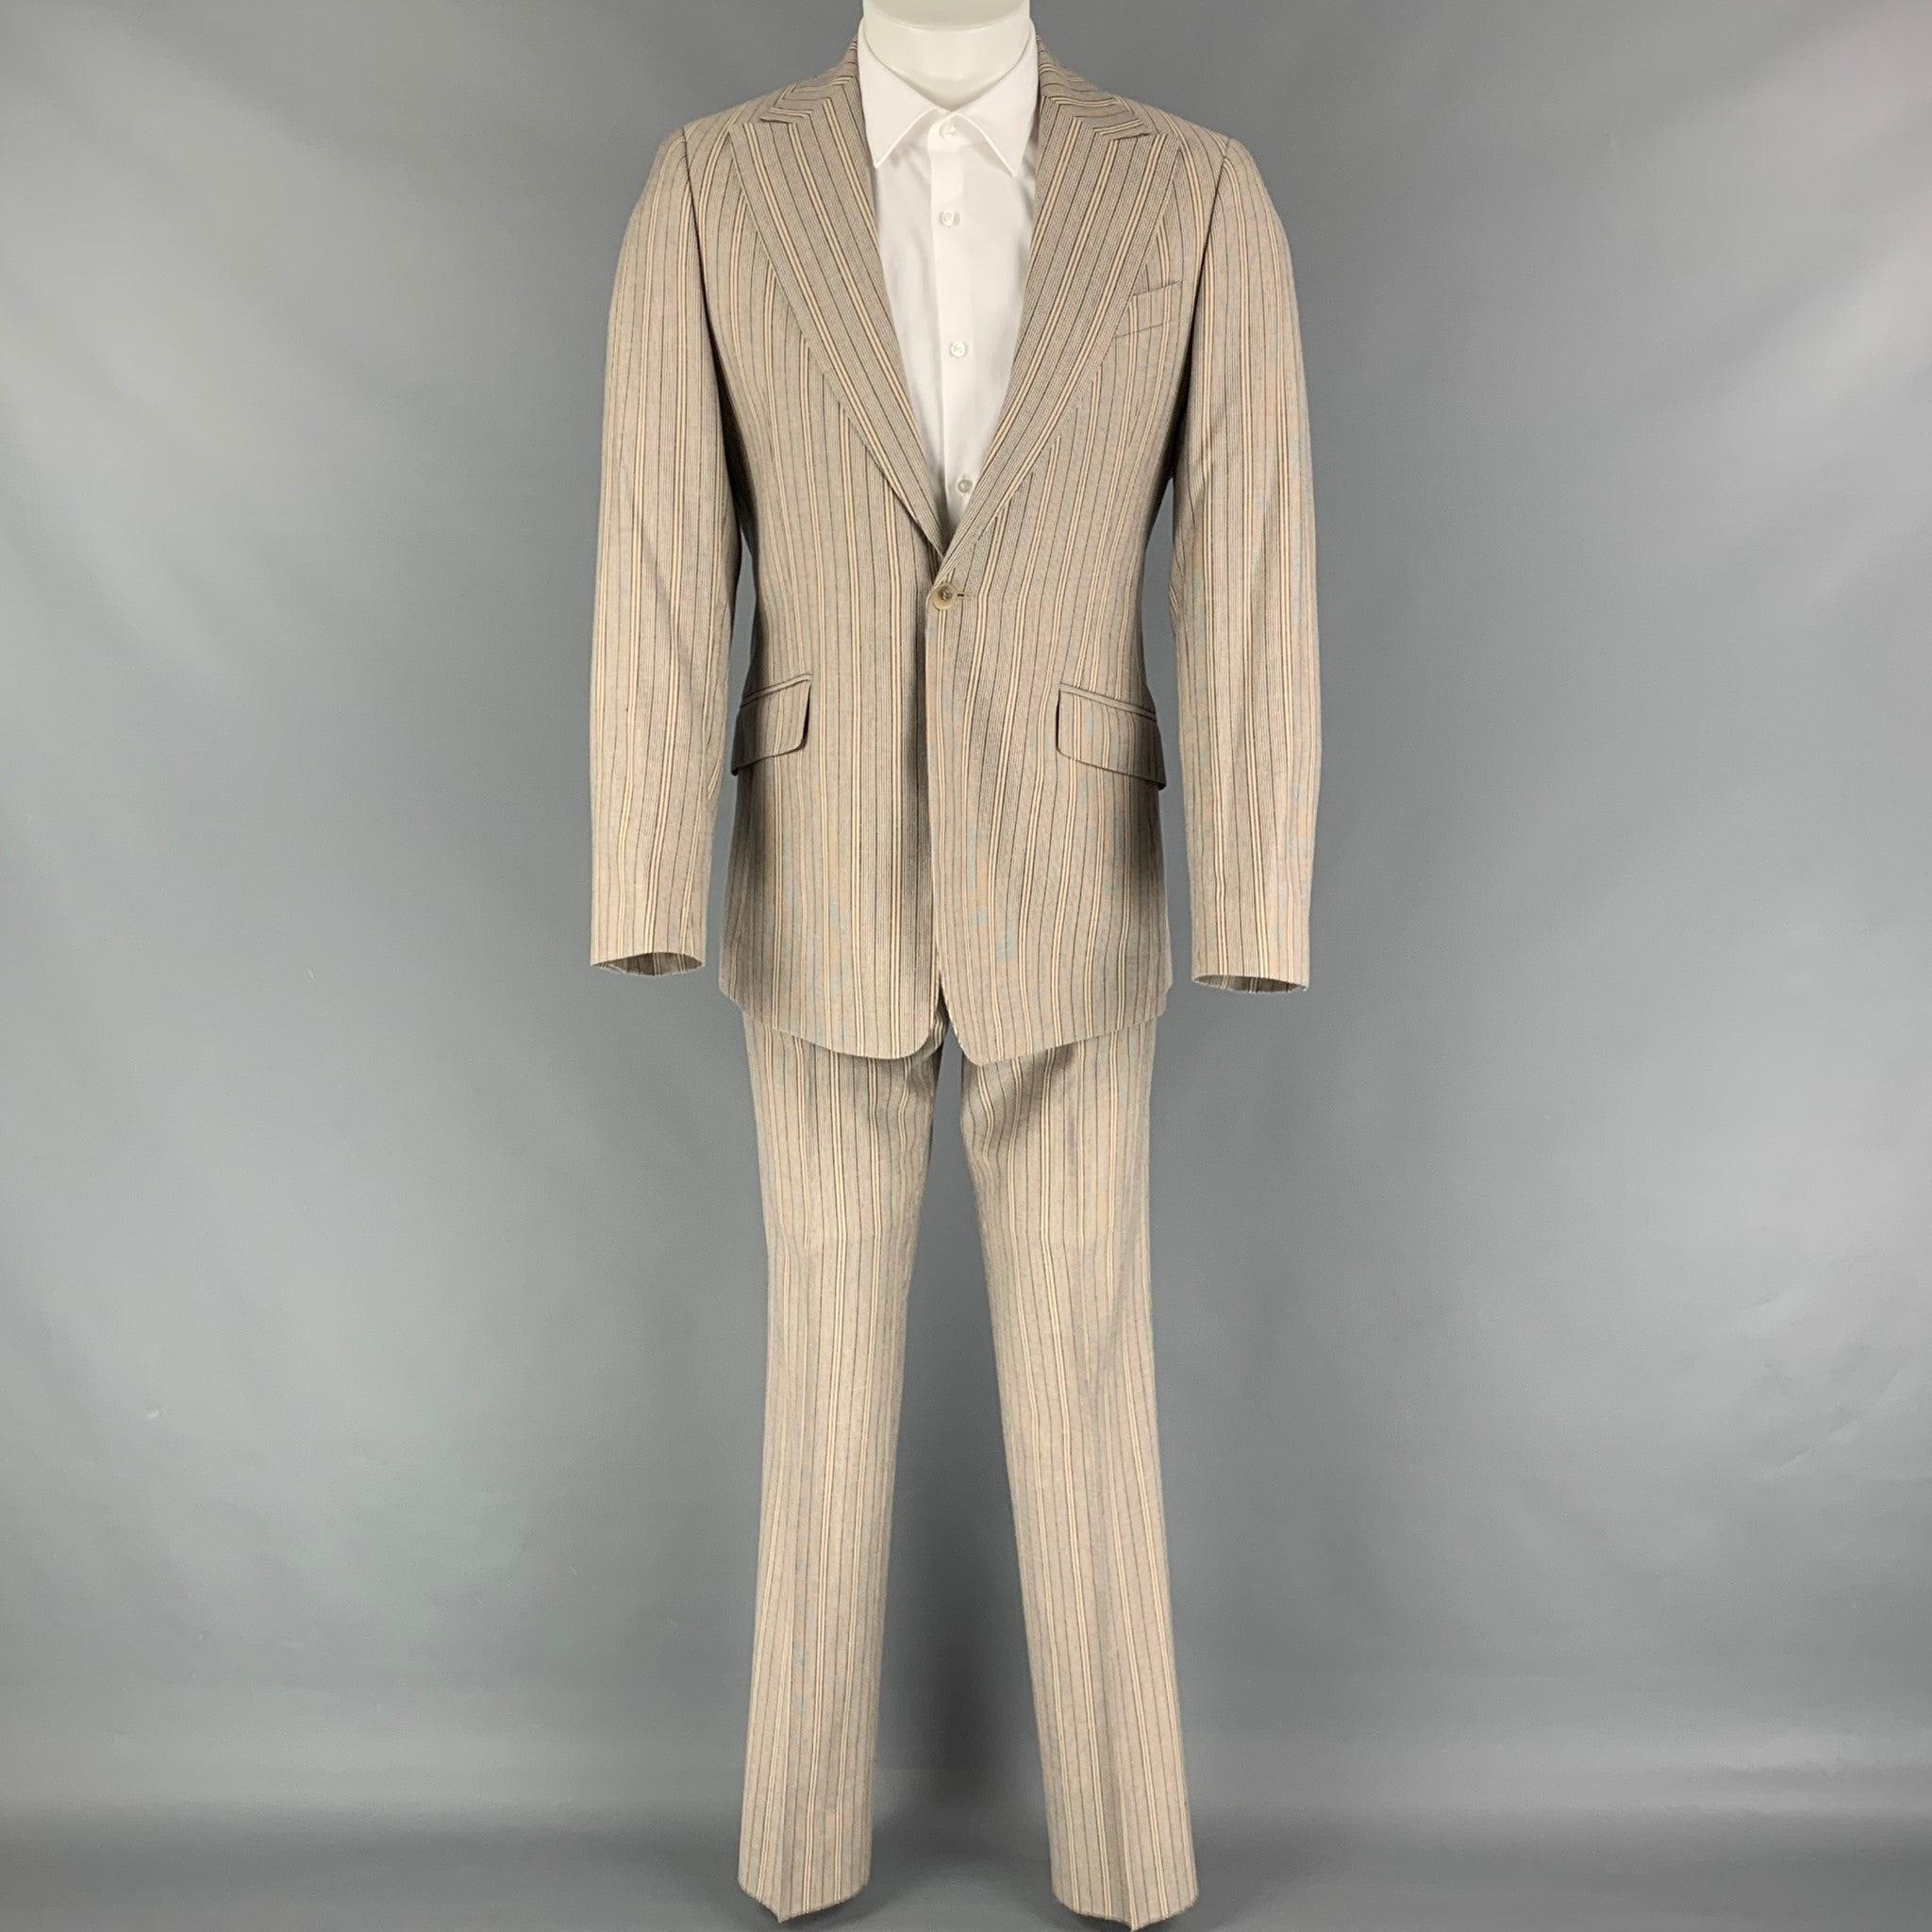 D&G by DOLCE & GABBANA
suit comes in a khaki & navy stripe polyester blend with a full liner and includes a single breasted, single button sport coat with a peak lapel and matching flat front trousers. Made in Italy. Very Good Pre-Owned Condition.